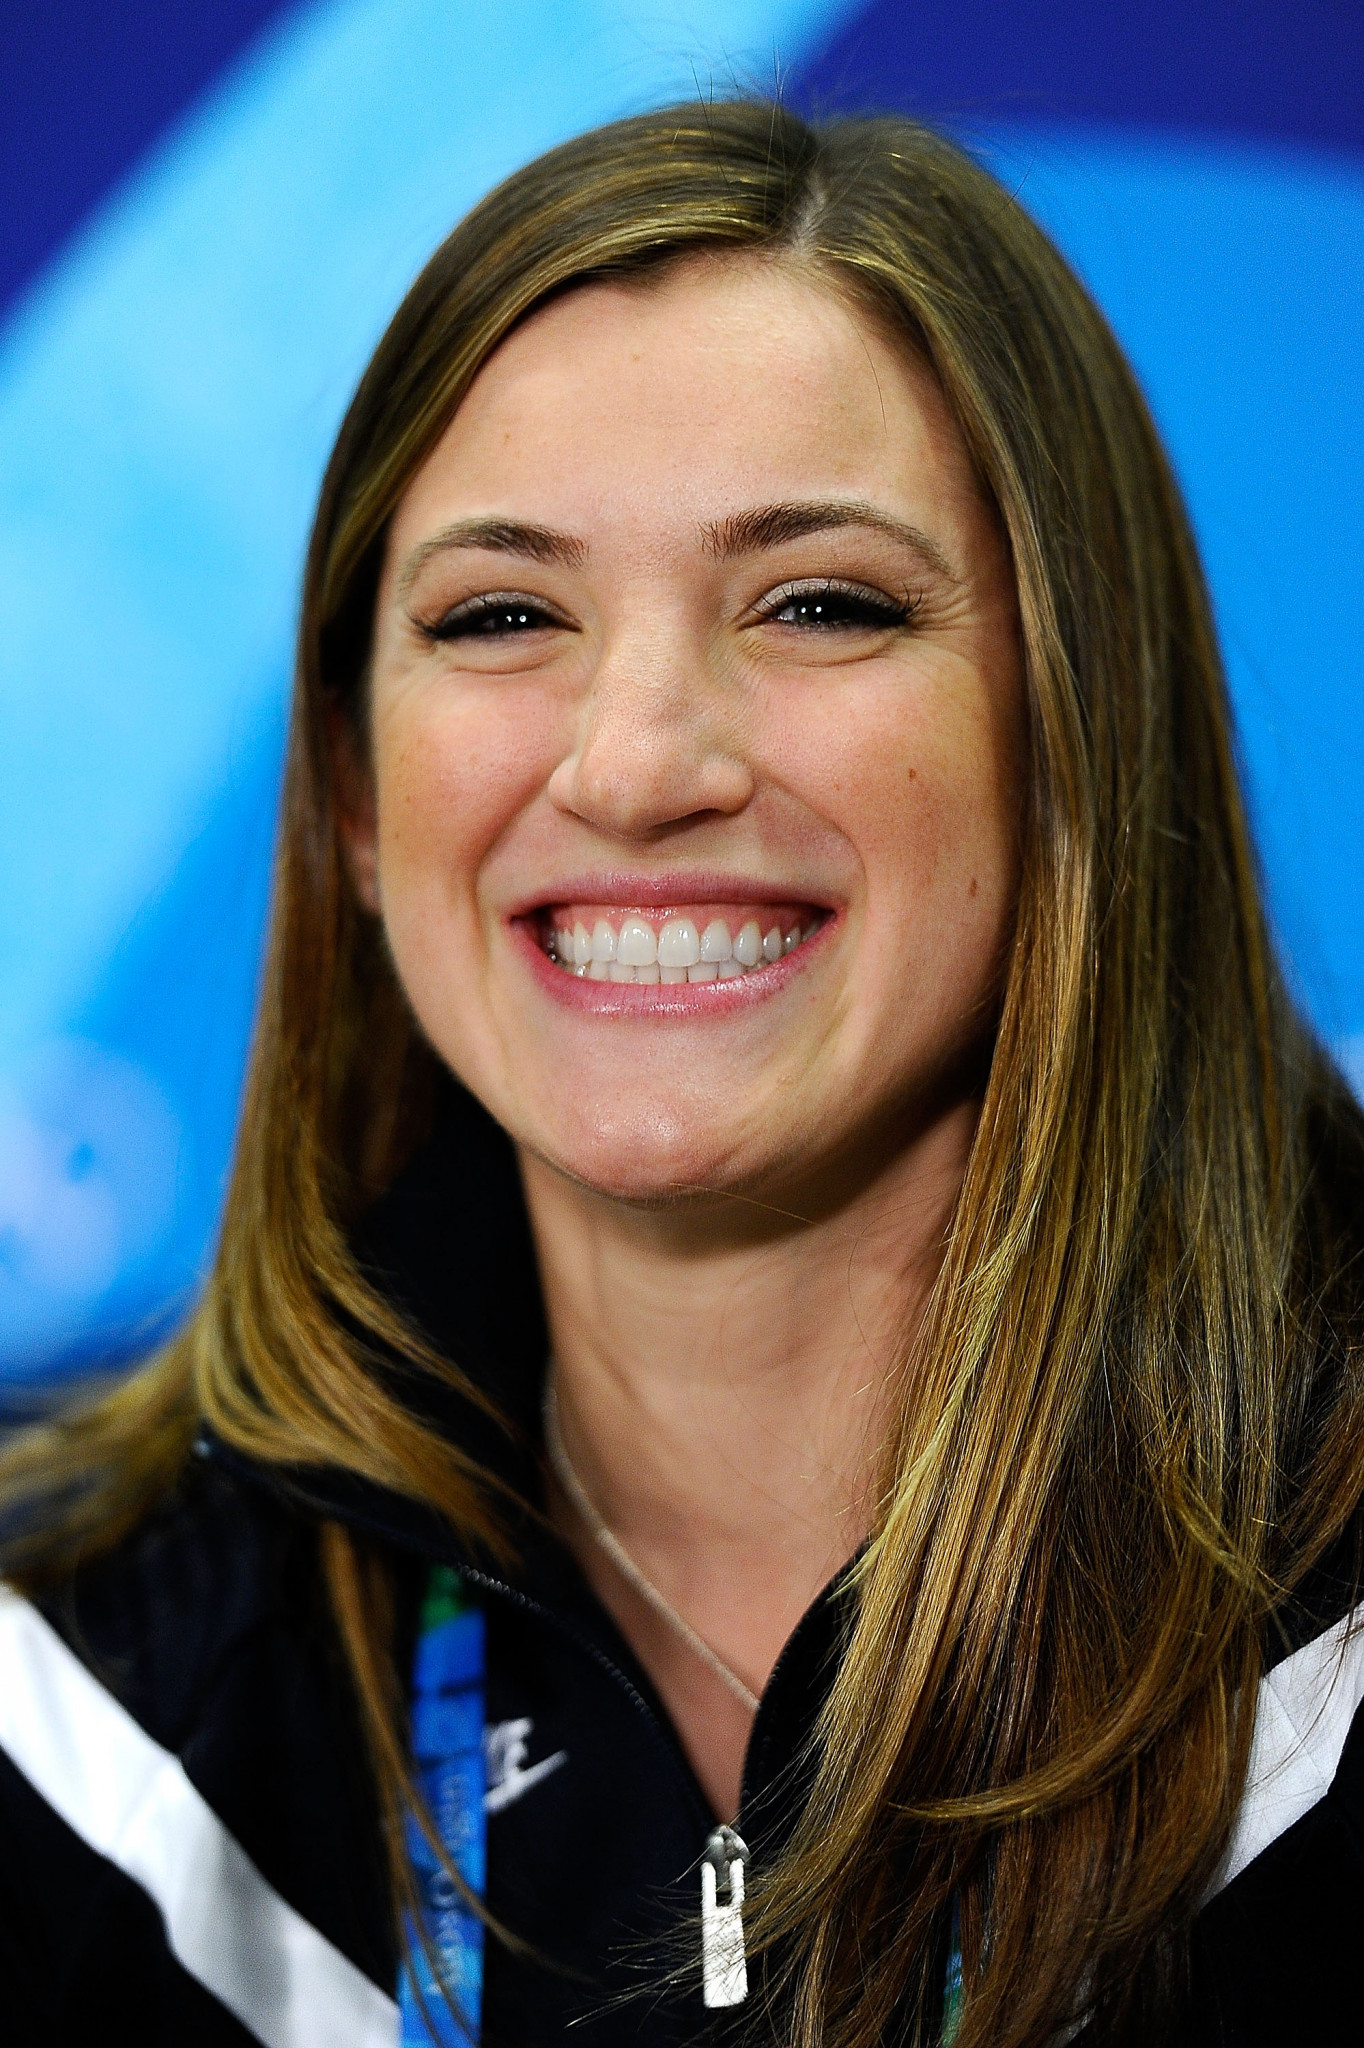  Bree Schaaf, pictured at the Vancouver 2010 Winter Olympics, has become chair of the Athletes' Advisory Council ©Getty Images